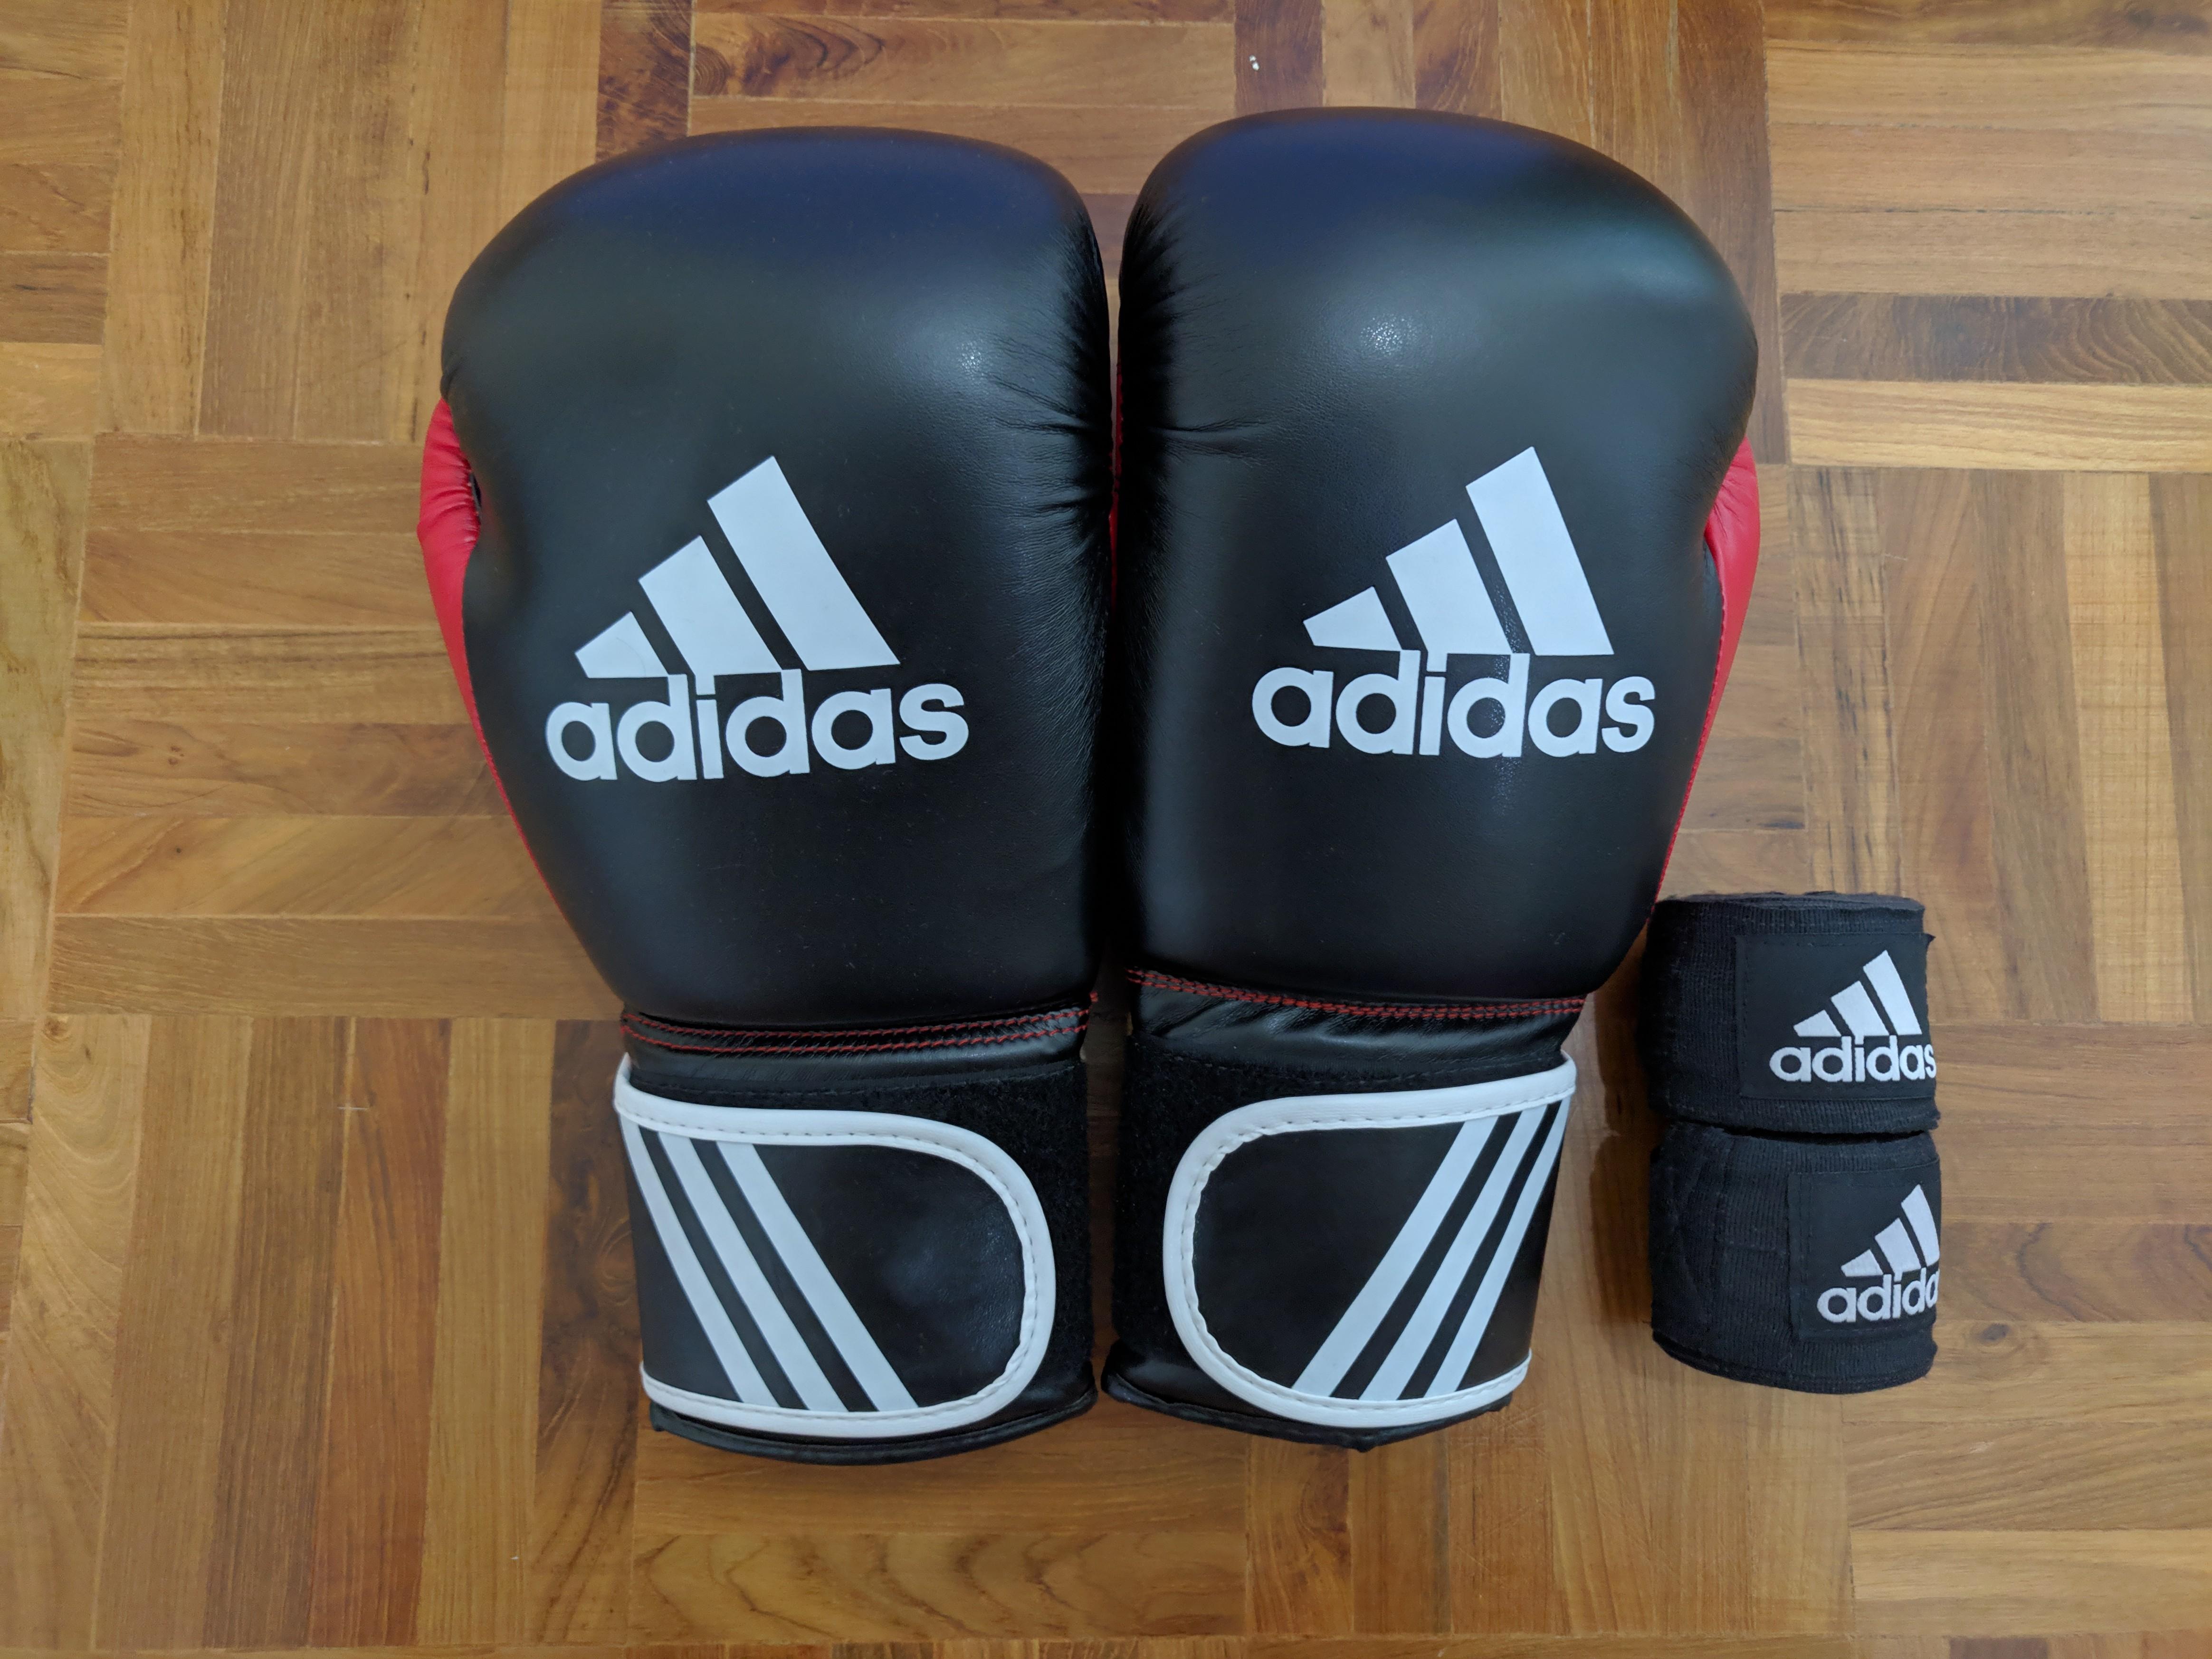 Adidas Boxing Gloves and Hand Wraps 